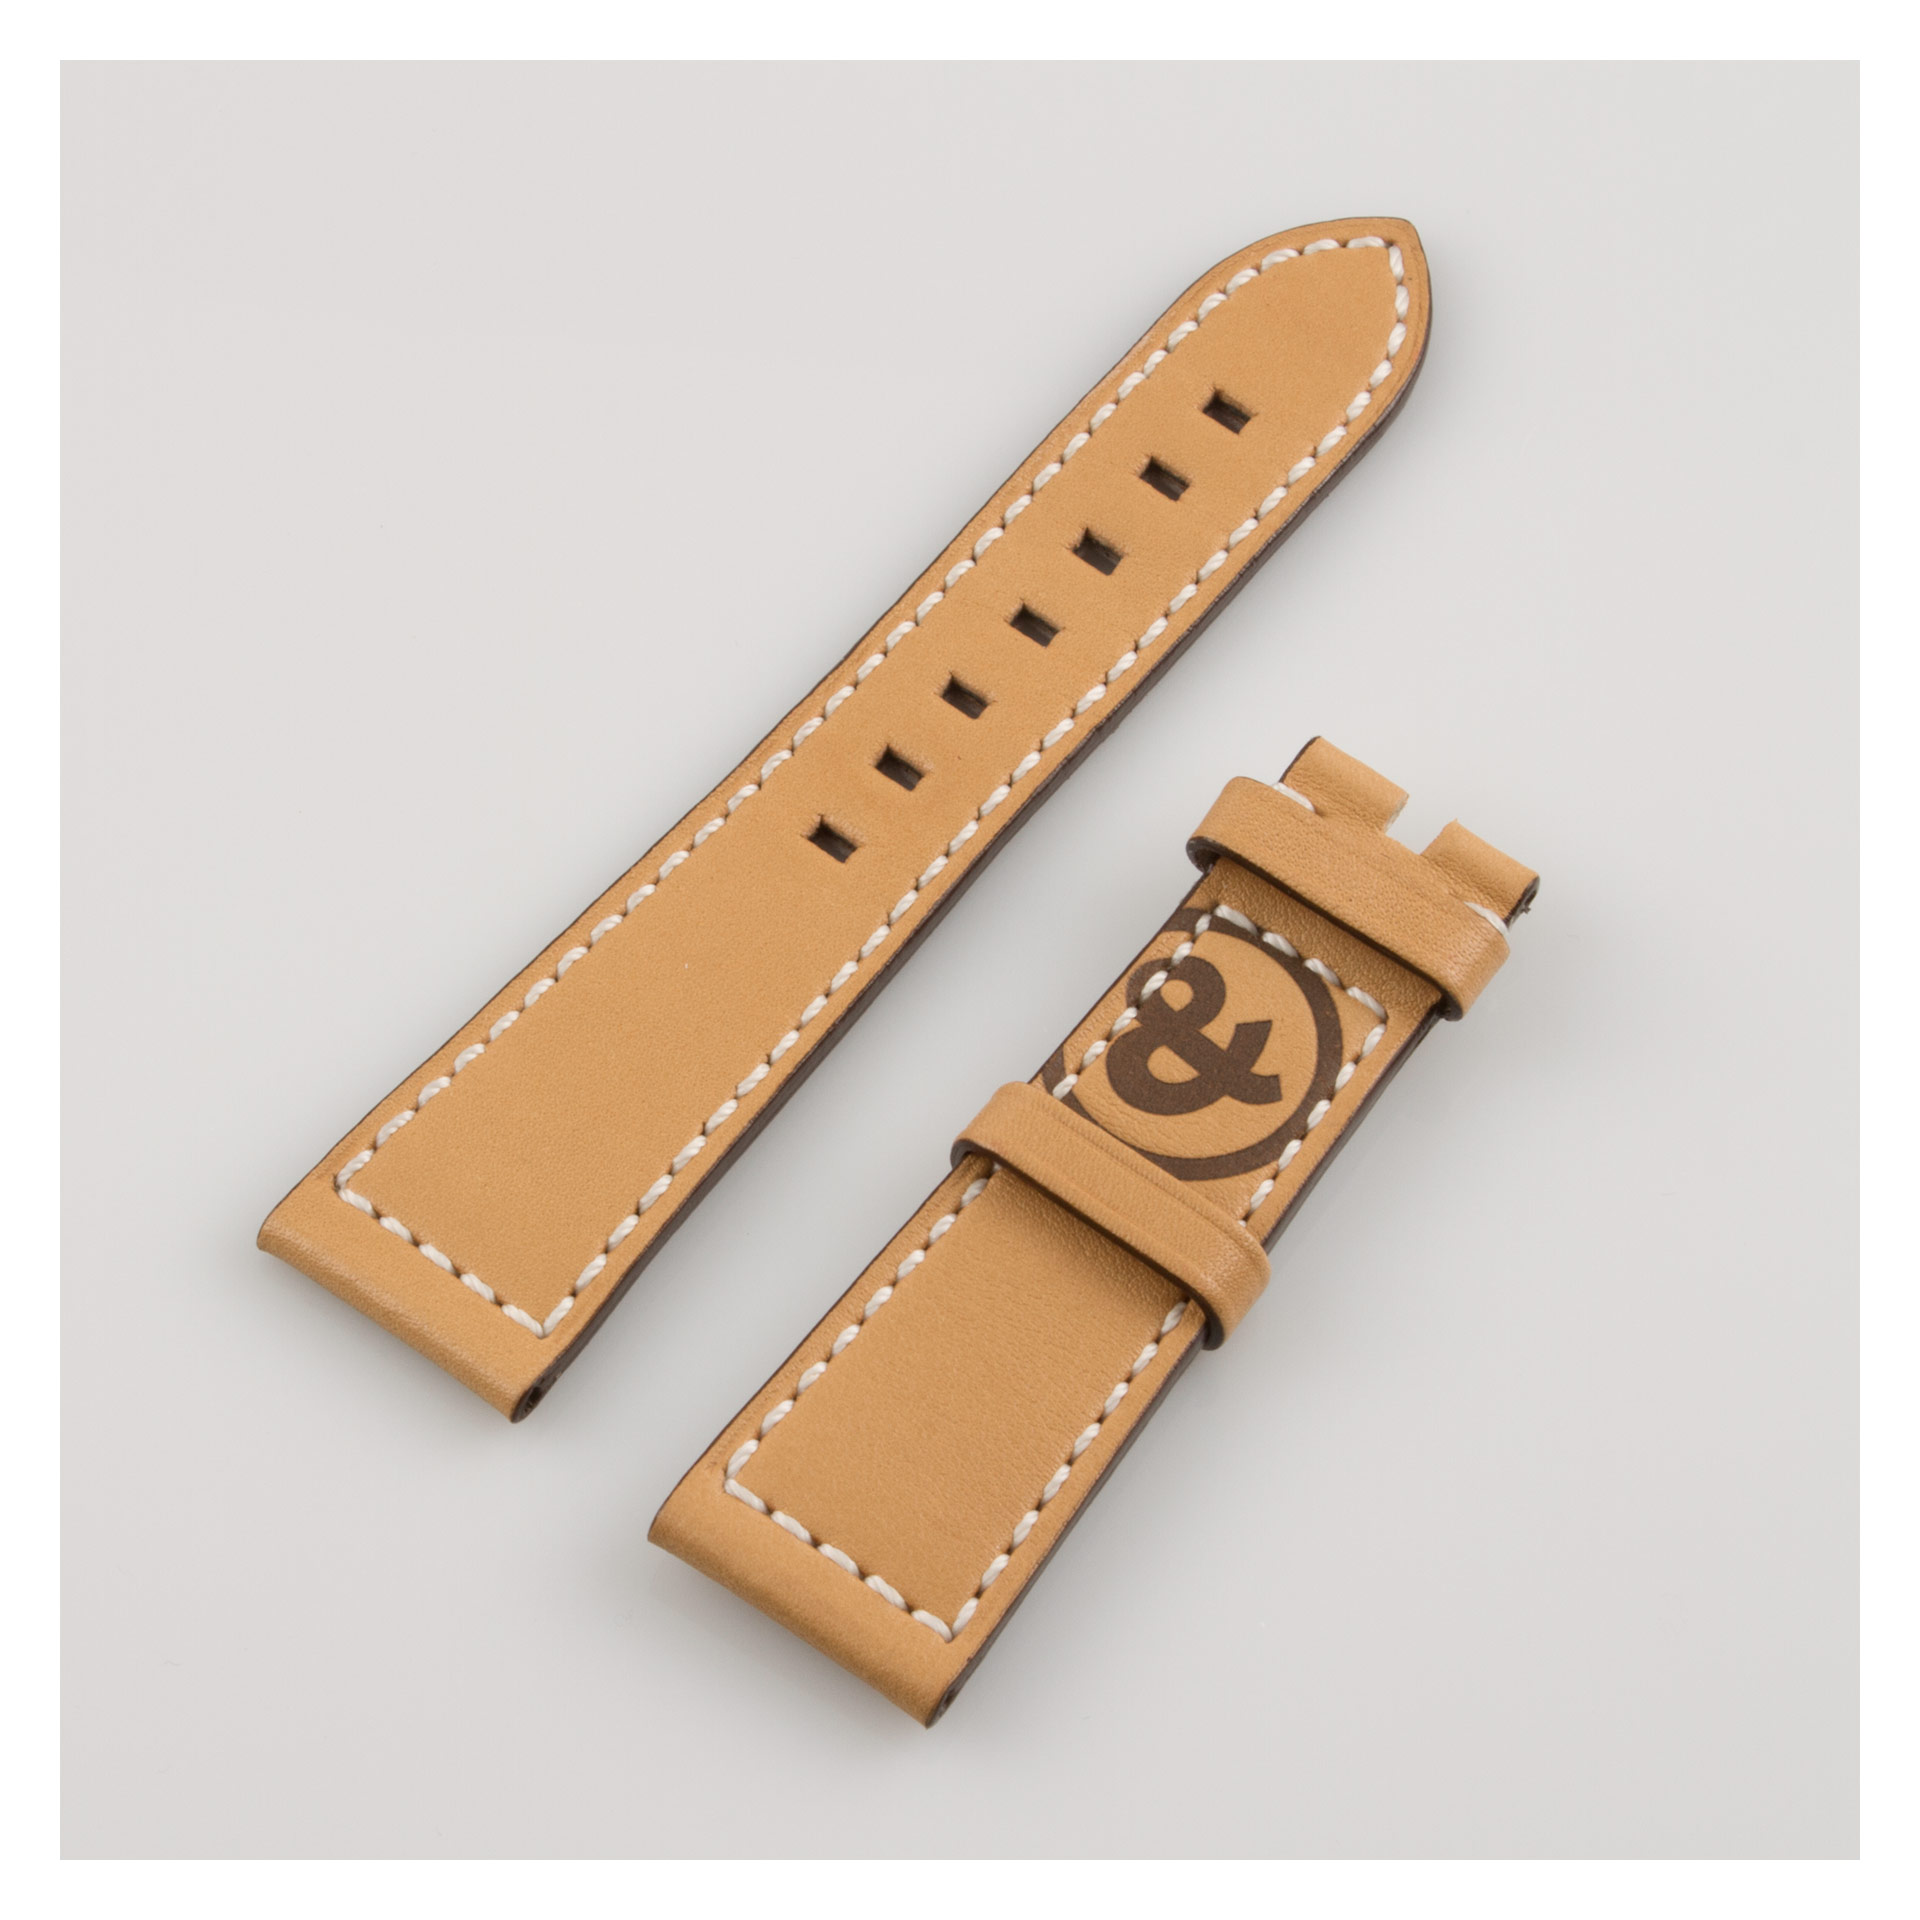 Bell & Ross camel / tan calfskin strap with contrast stitch & logo (22x18) image 1